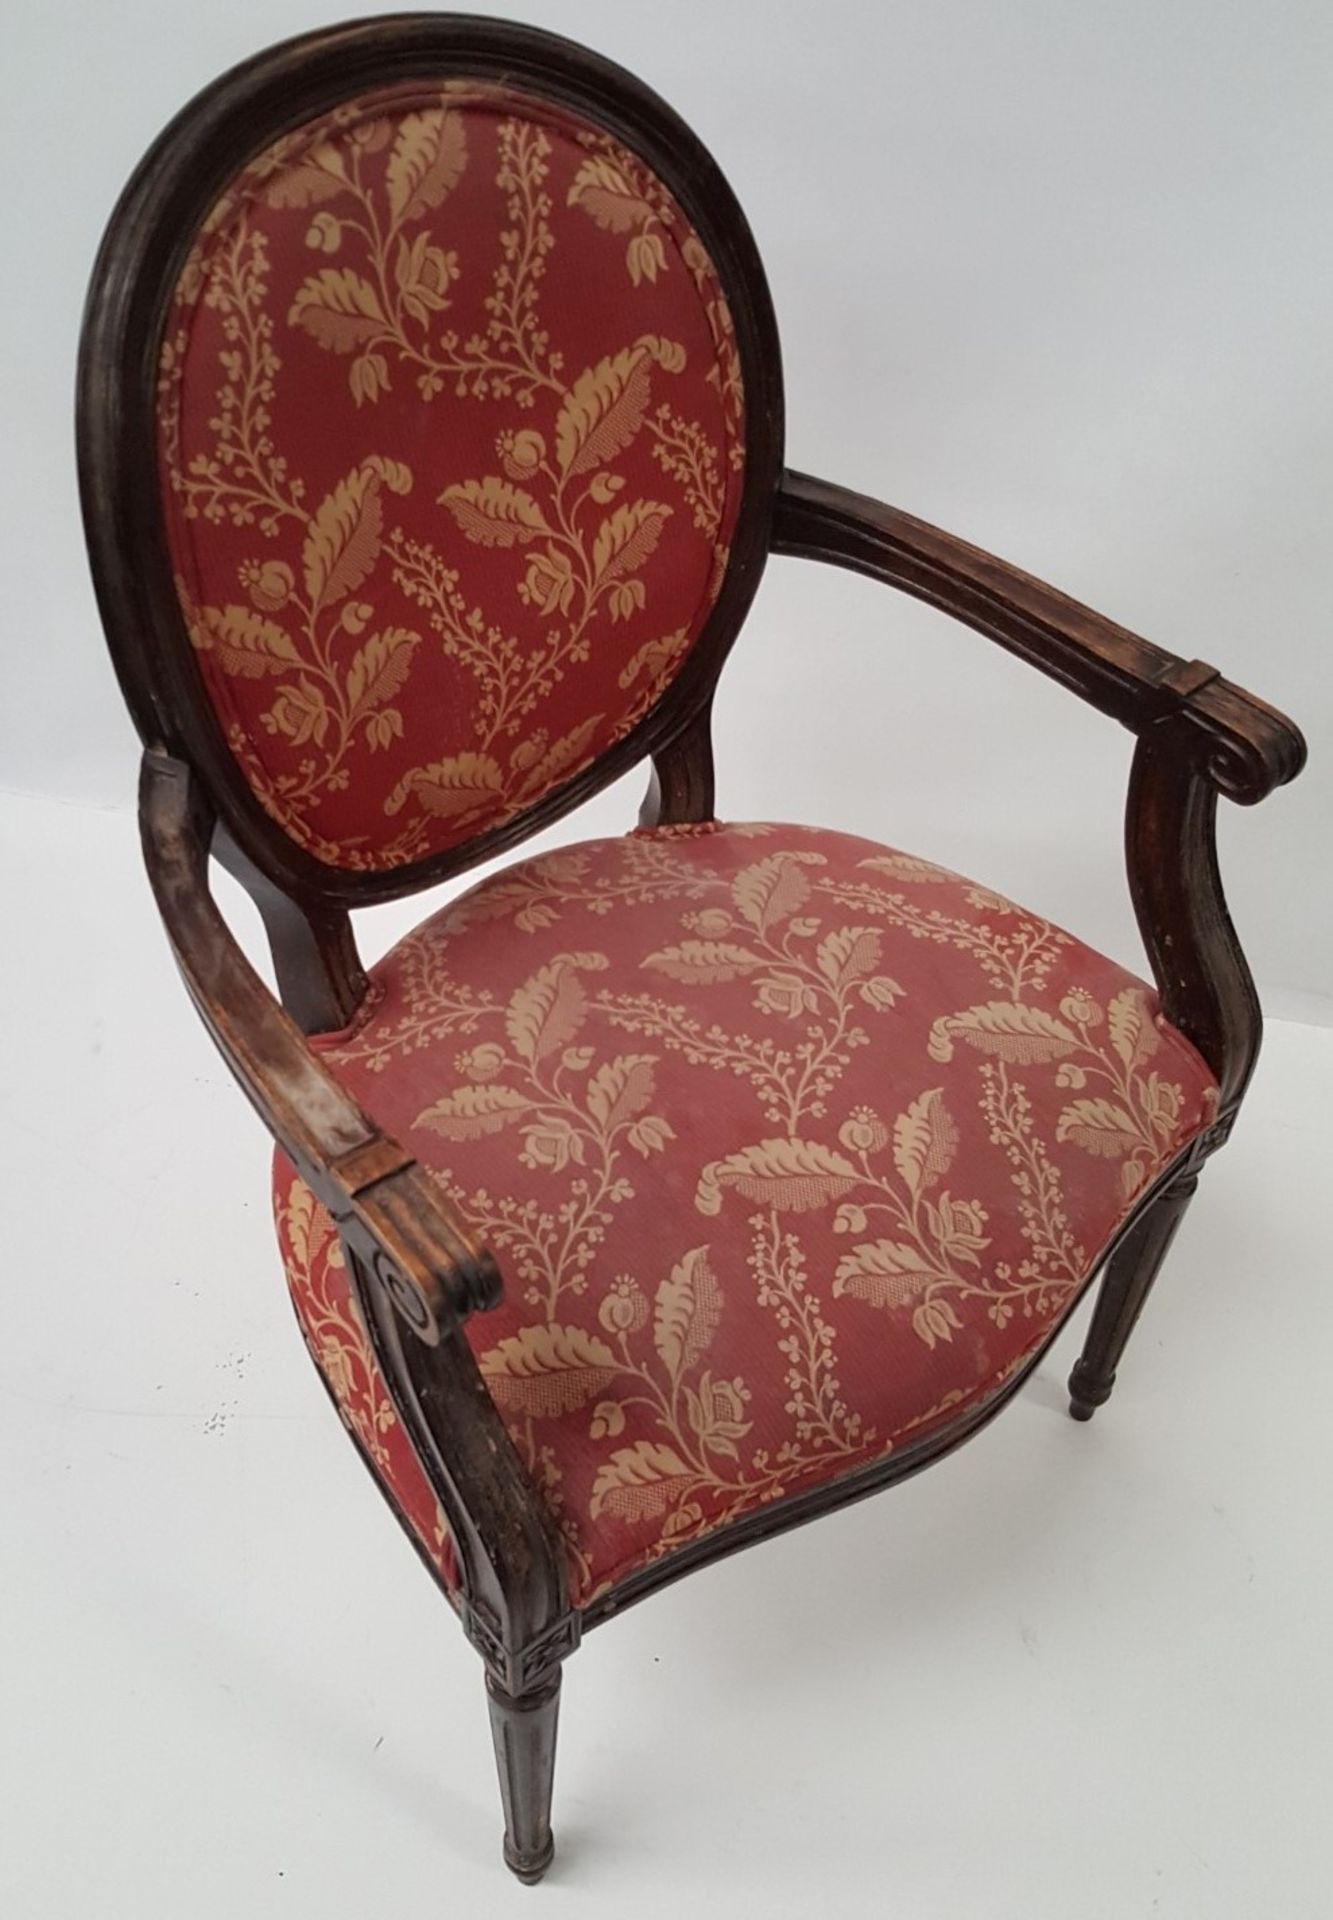 8 x Vintage Wooden Chairs Featuring Spindle Legs, And Upholstered In Red / Gold Floral Fabric - - Image 3 of 8